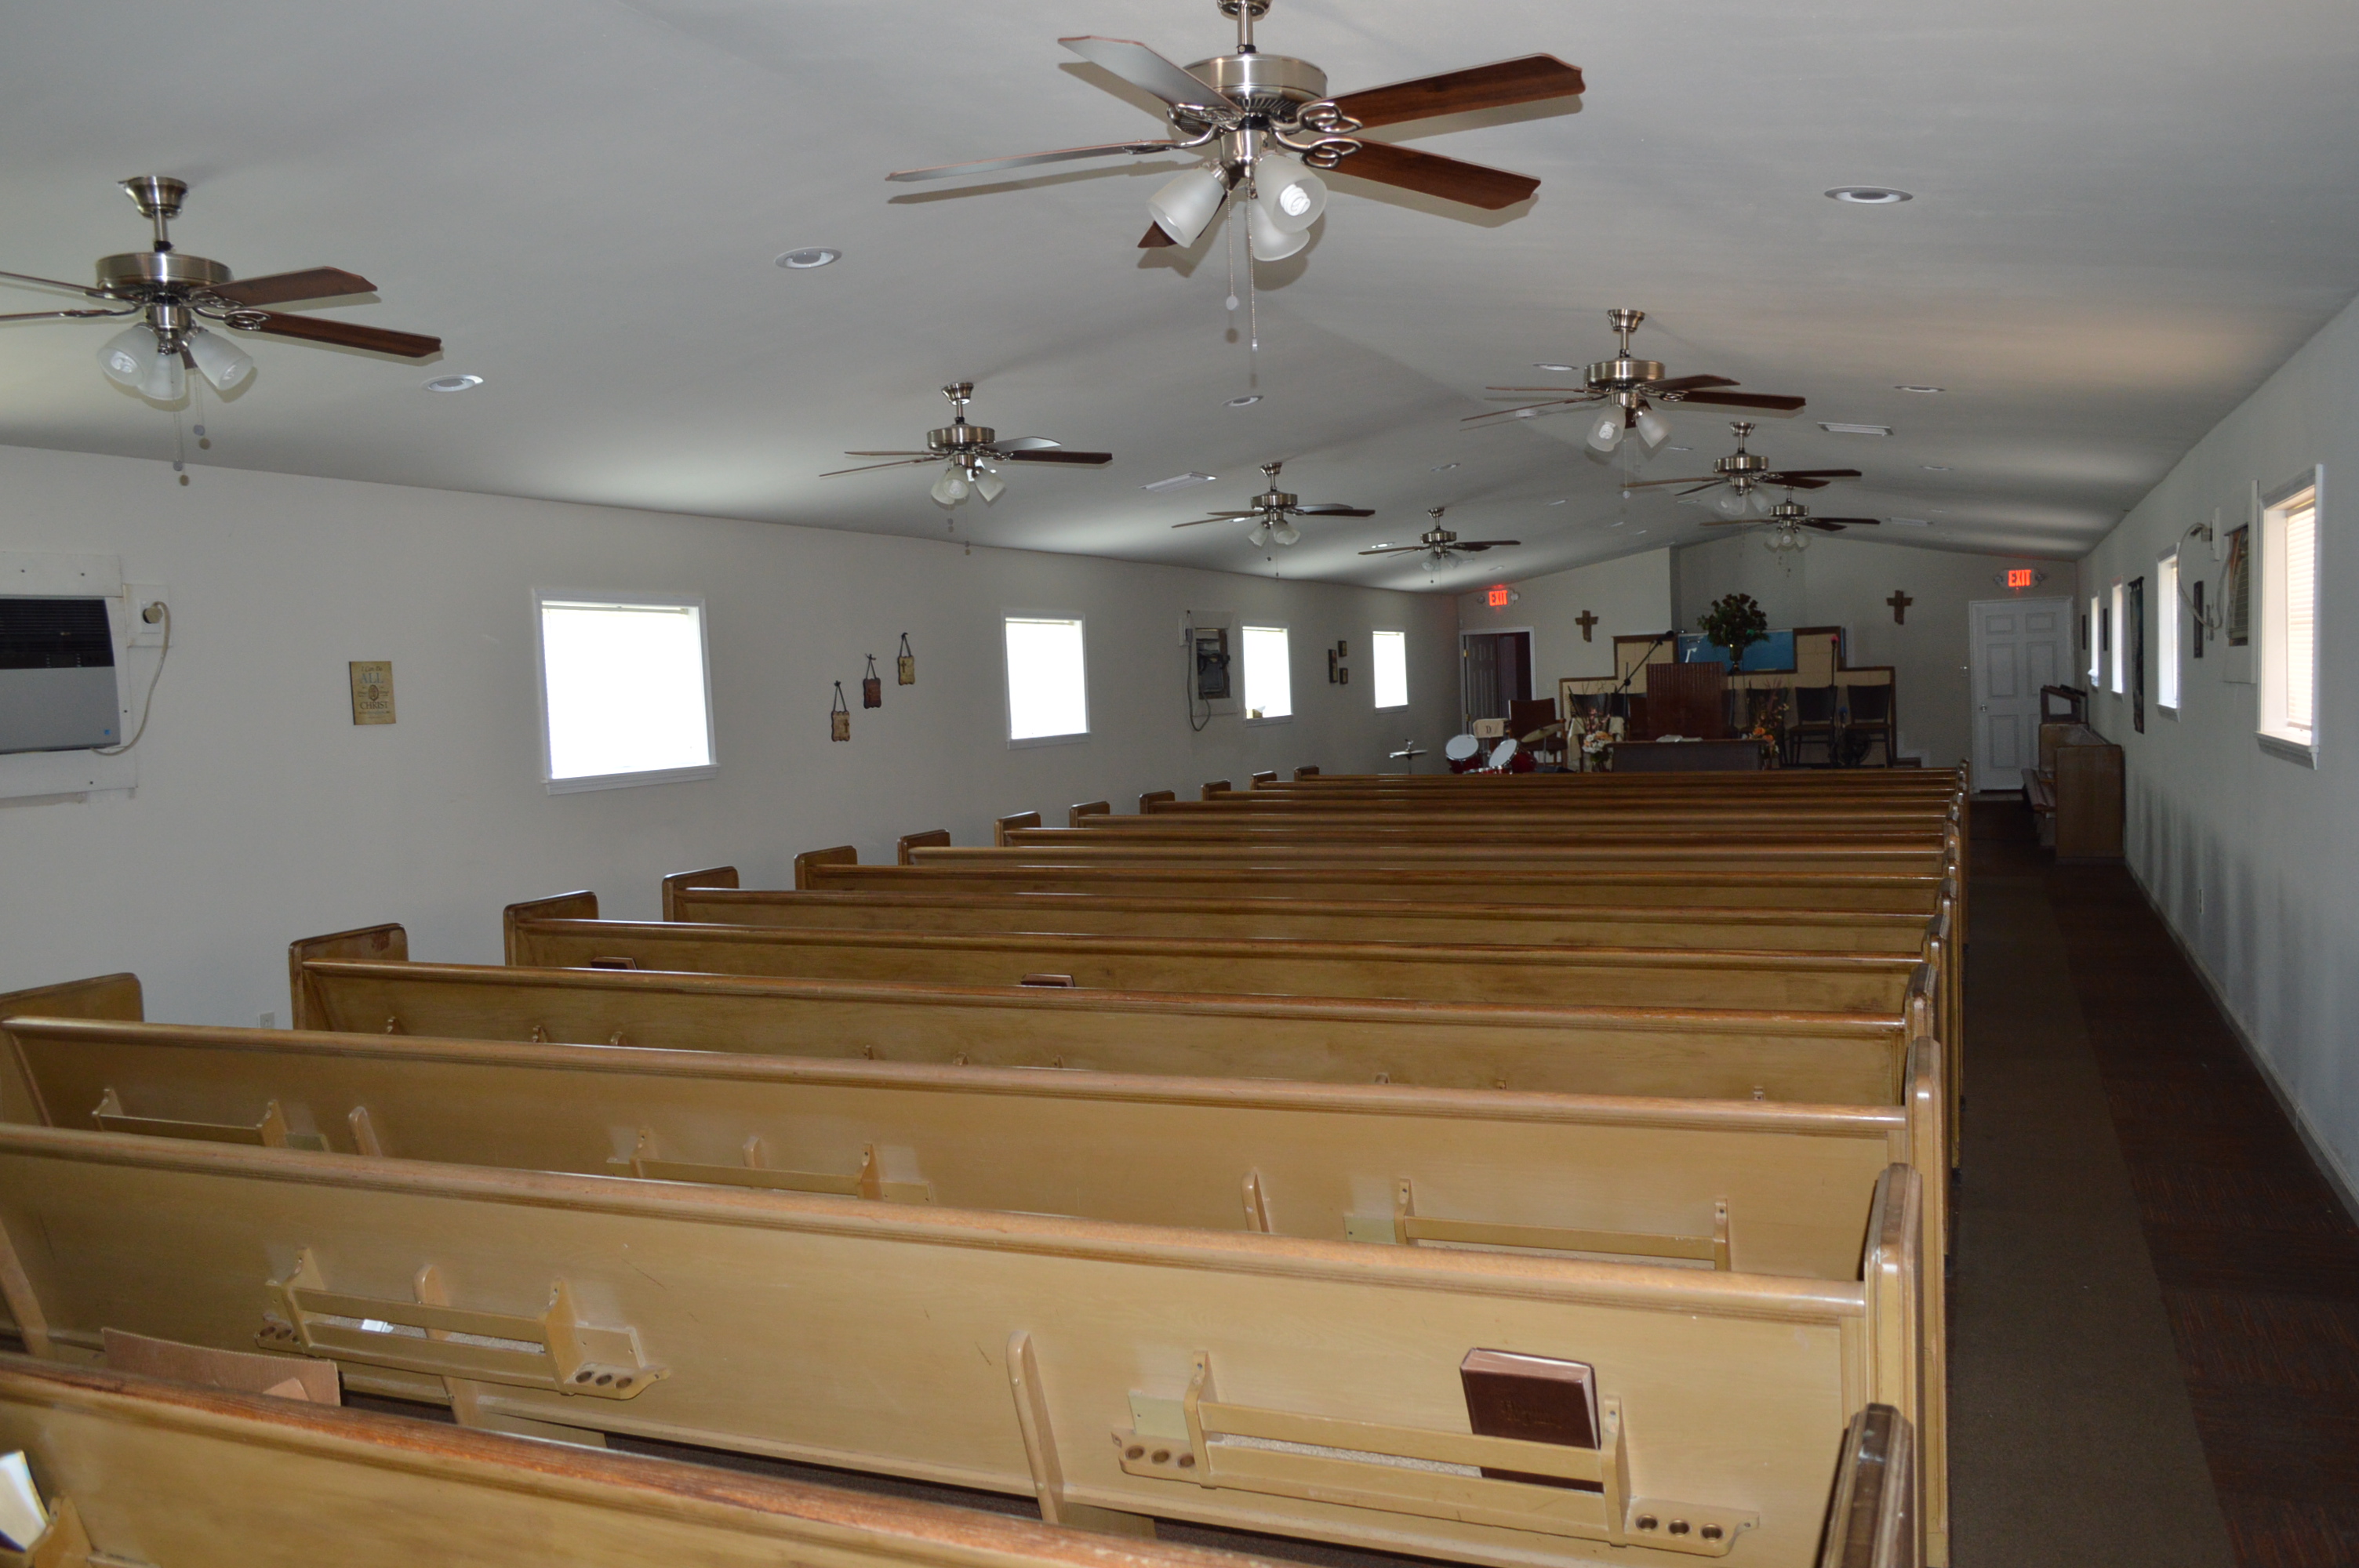 The sanctuary of Disciples of Christ Christian Fellowship Ministry in New Orleans’ Lower Ninth Ward. The pews were donated by the congregation of Salem Church on Staten Island. (Anthony C. Hayes)